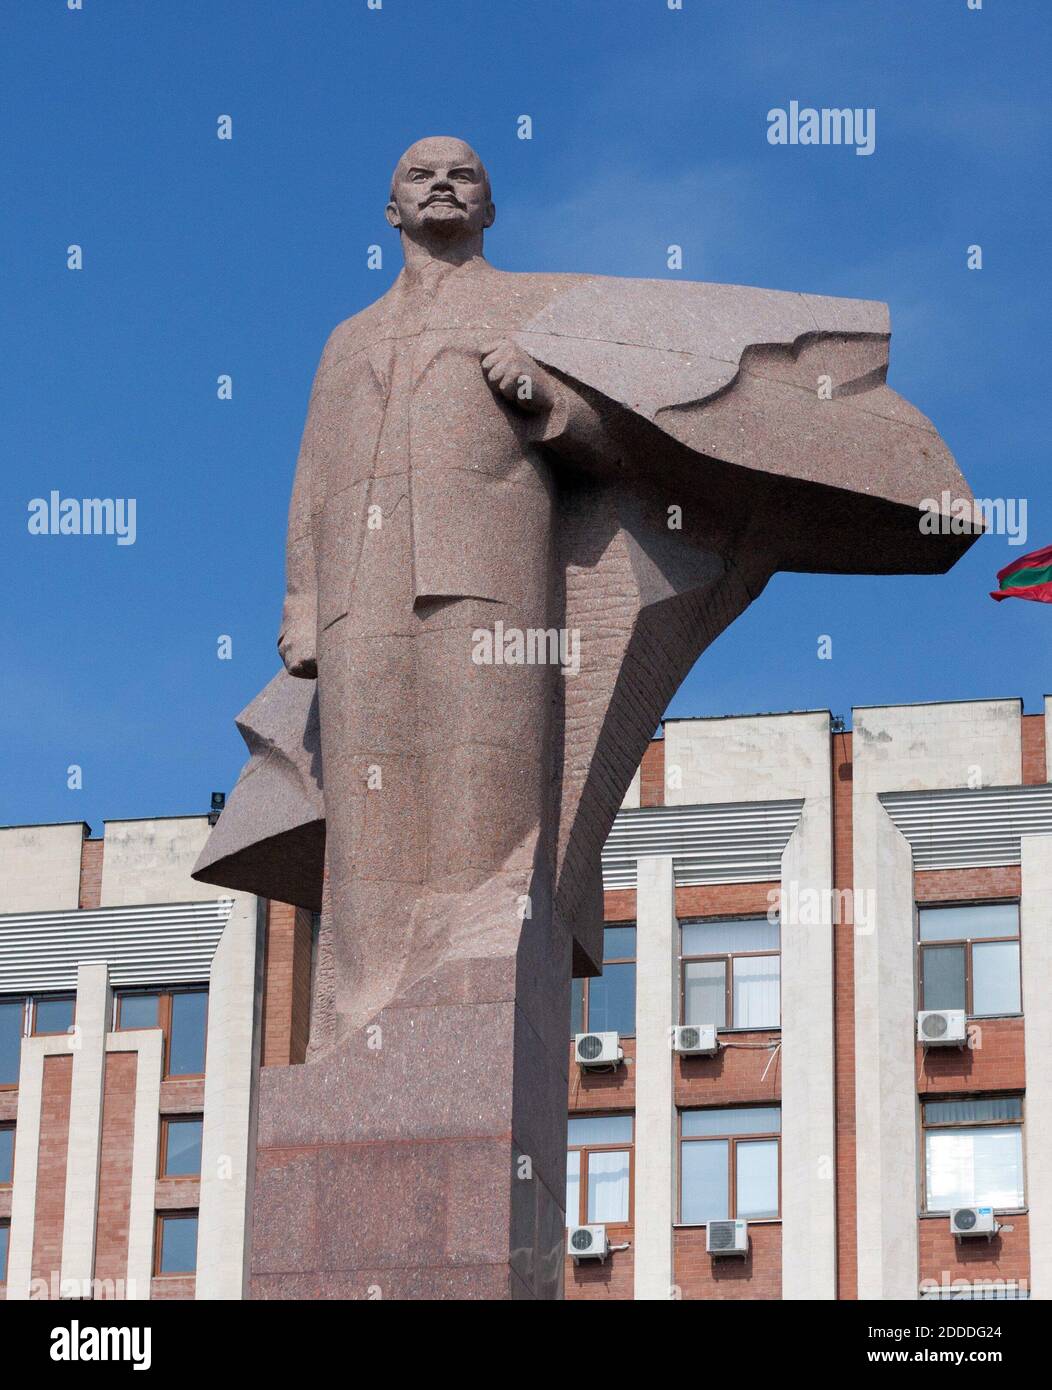 NO FILM, NO VIDEO, NO TV, NO DOCUMENTARY - A statue of Lenin is seen outside the Supreme Soviet, the parliament building in Tiraspol in the soviet Republic of Trans-Dniester, a sliver of contested land that declared its independence from Moldova, Europe's poorest nation, back in 1990 but is yet to be recognized by any government around the world. With a population of just half a million, a mix of ethnic Russians, Moldovans and Ukrainians, Trans-Dniester is little more than a blip on the map, but in recent weeks it has become the focus of much political attention. Photo by Kit Gillet/MCT/ABACAP Stock Photo